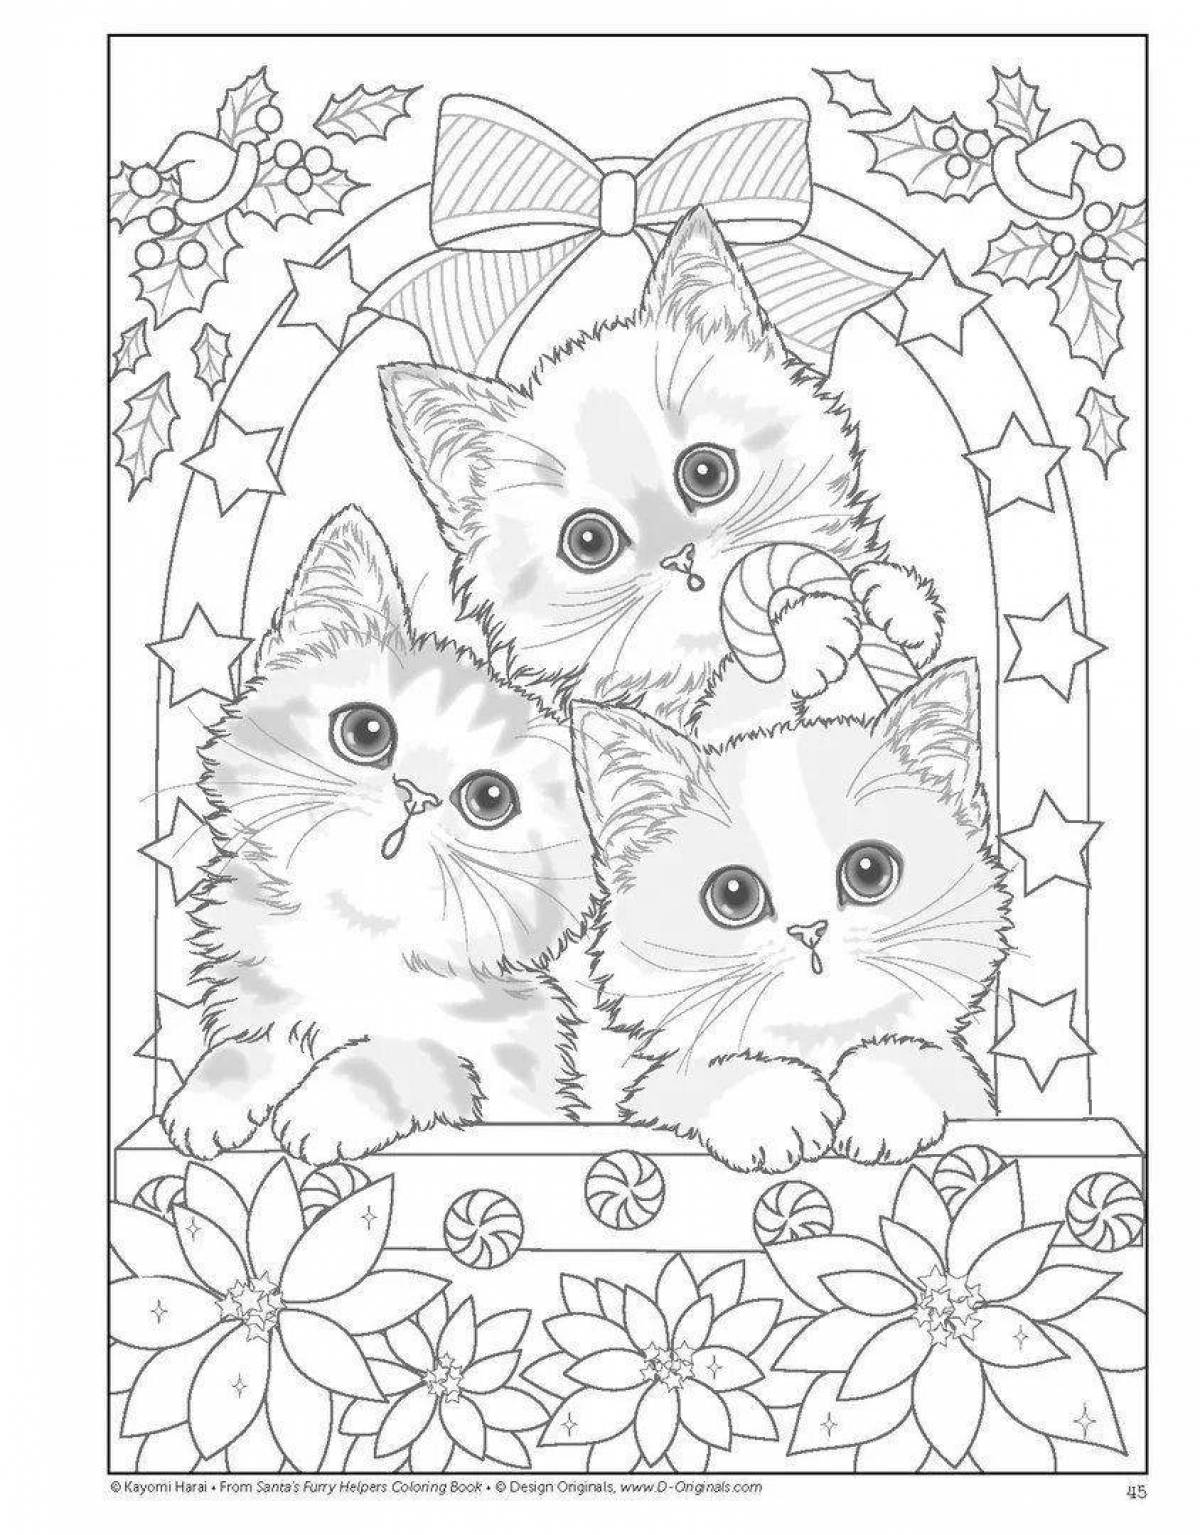 Soft cat coloring by numbers